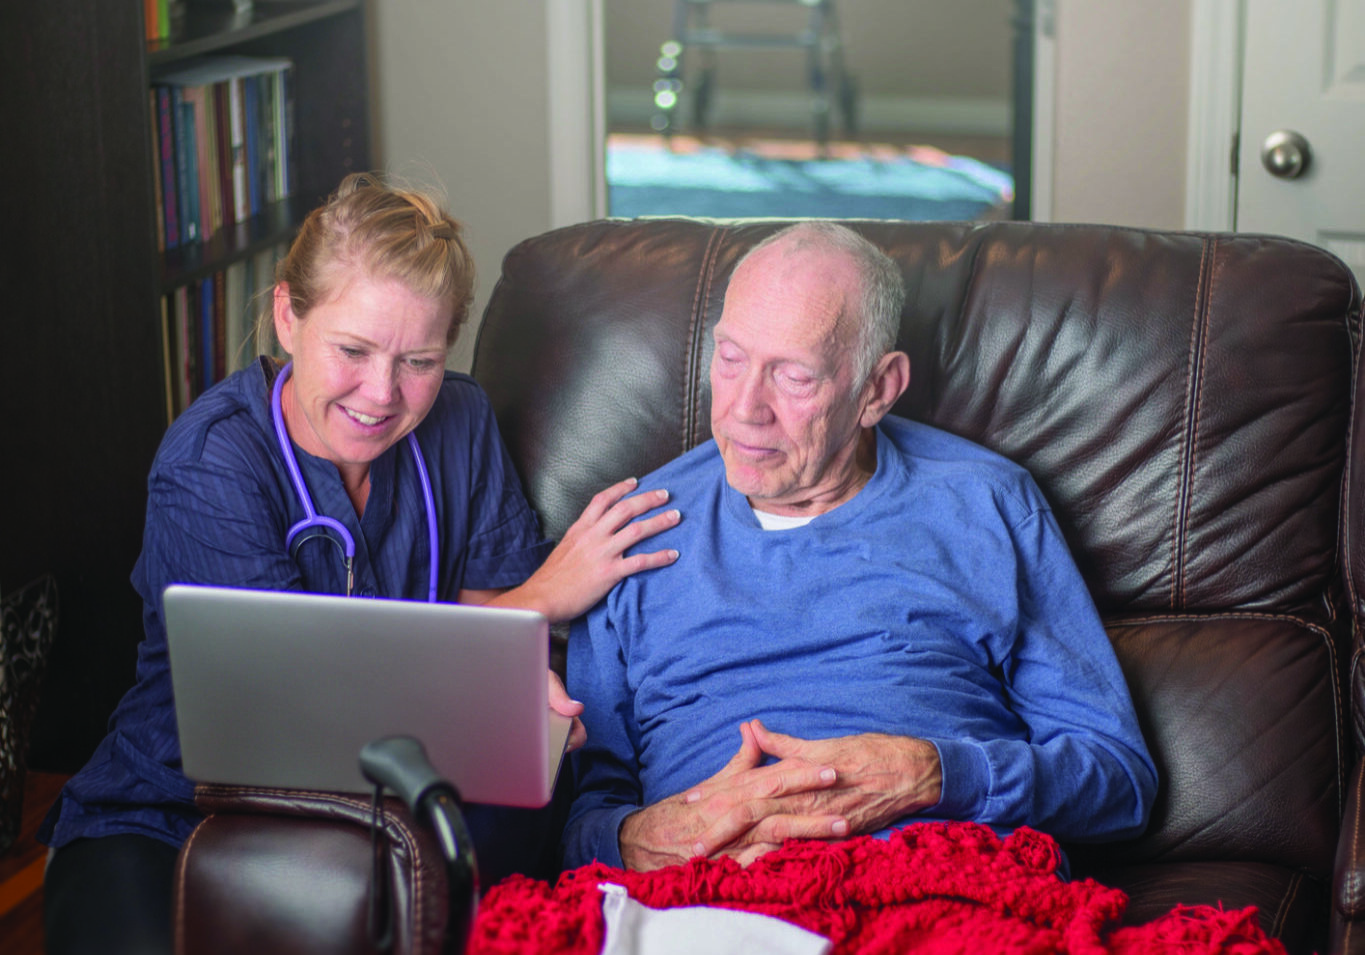 At home care giver sits with man on couch